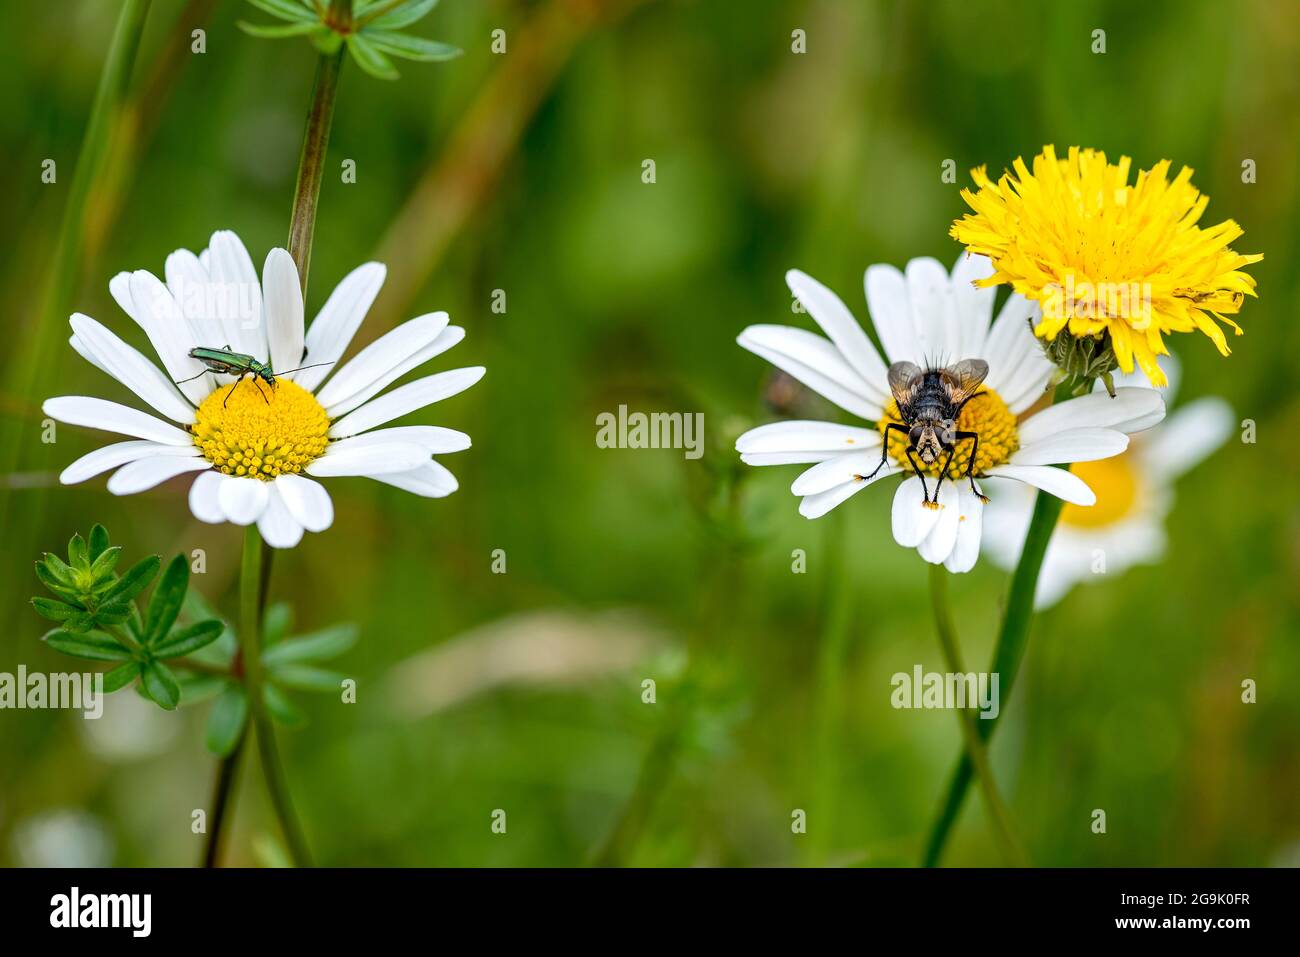 Spanish fly (Lytta vesicatoria) and House Fly (Muscidae) on flowering marguerites (Leucanthemum) in wild, natural flower meadow, Germany Stock Photo